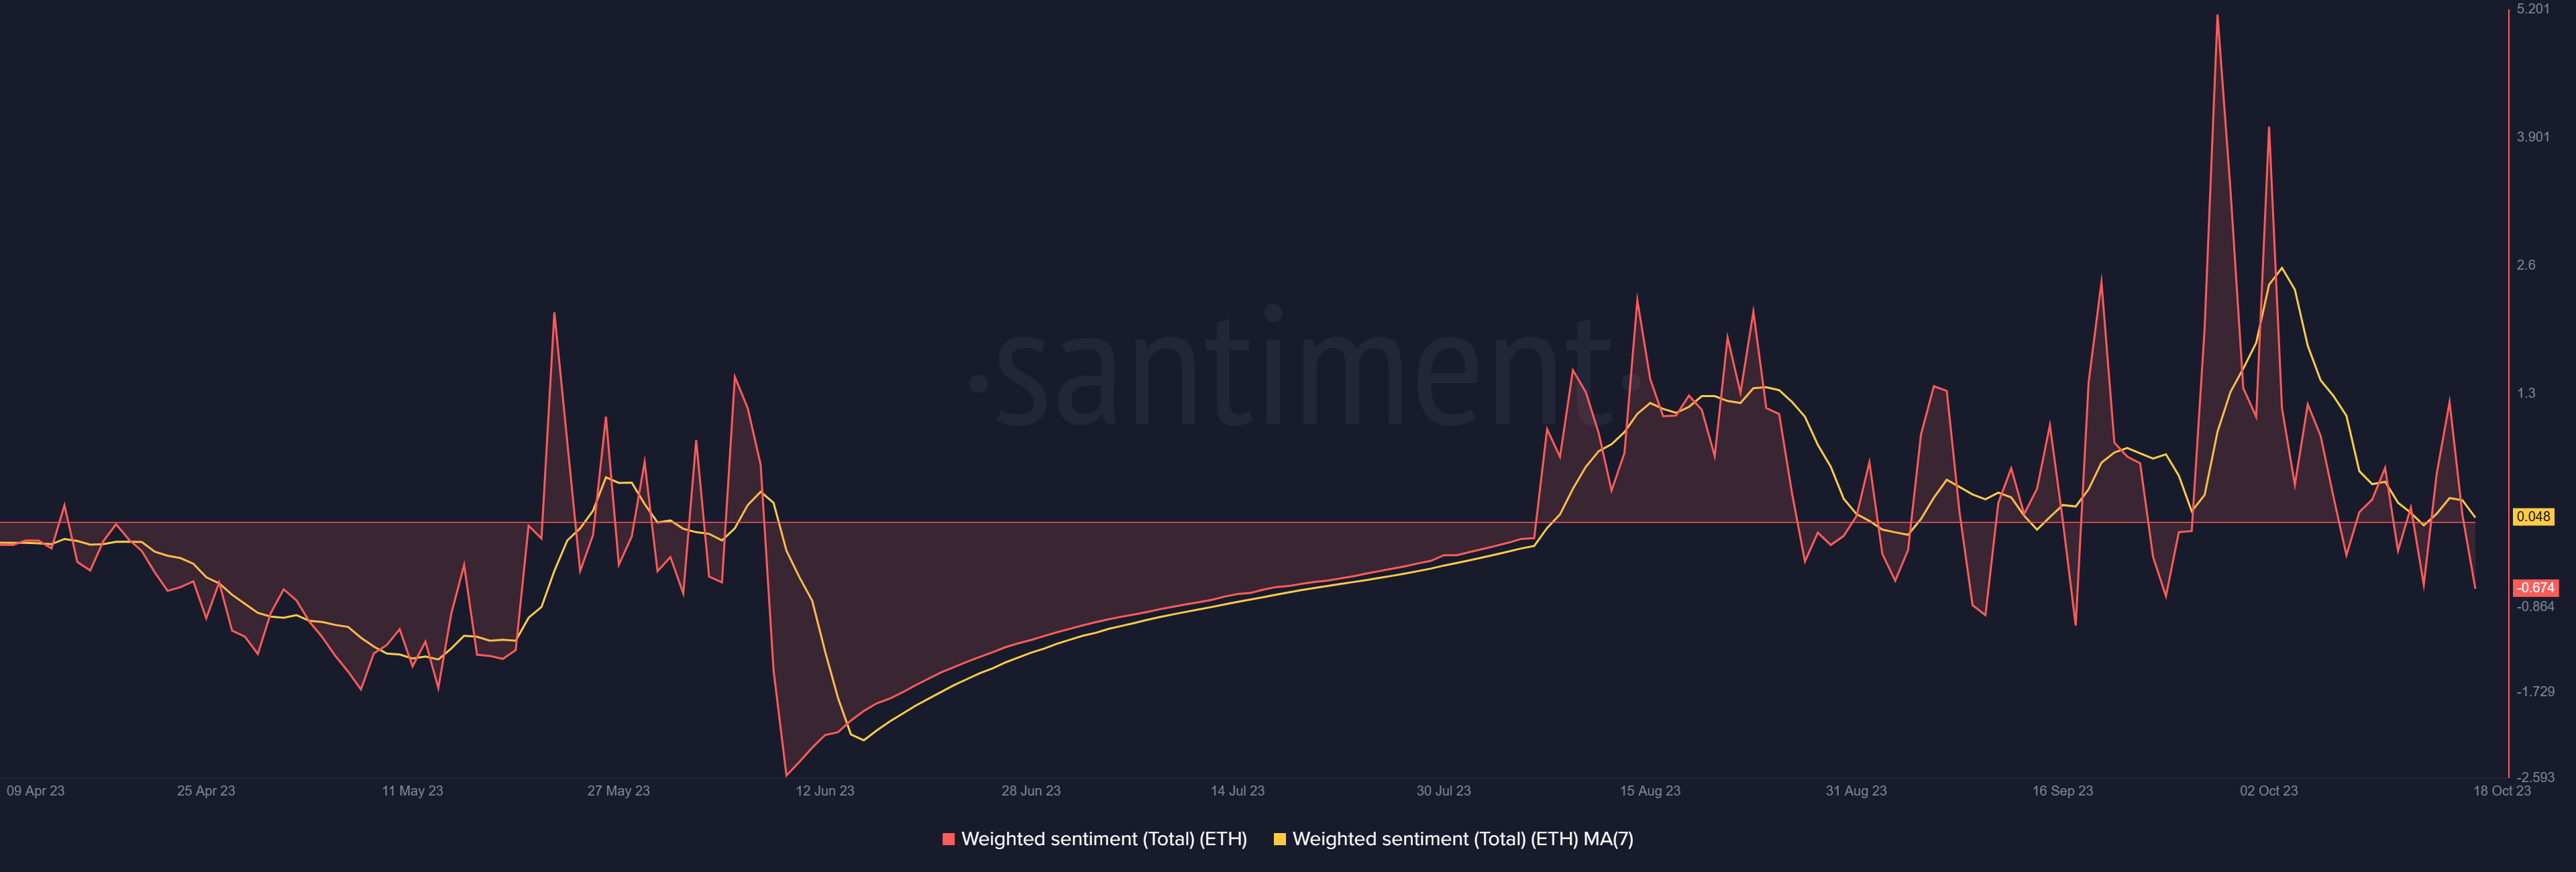 Ethereum weighted sentiment